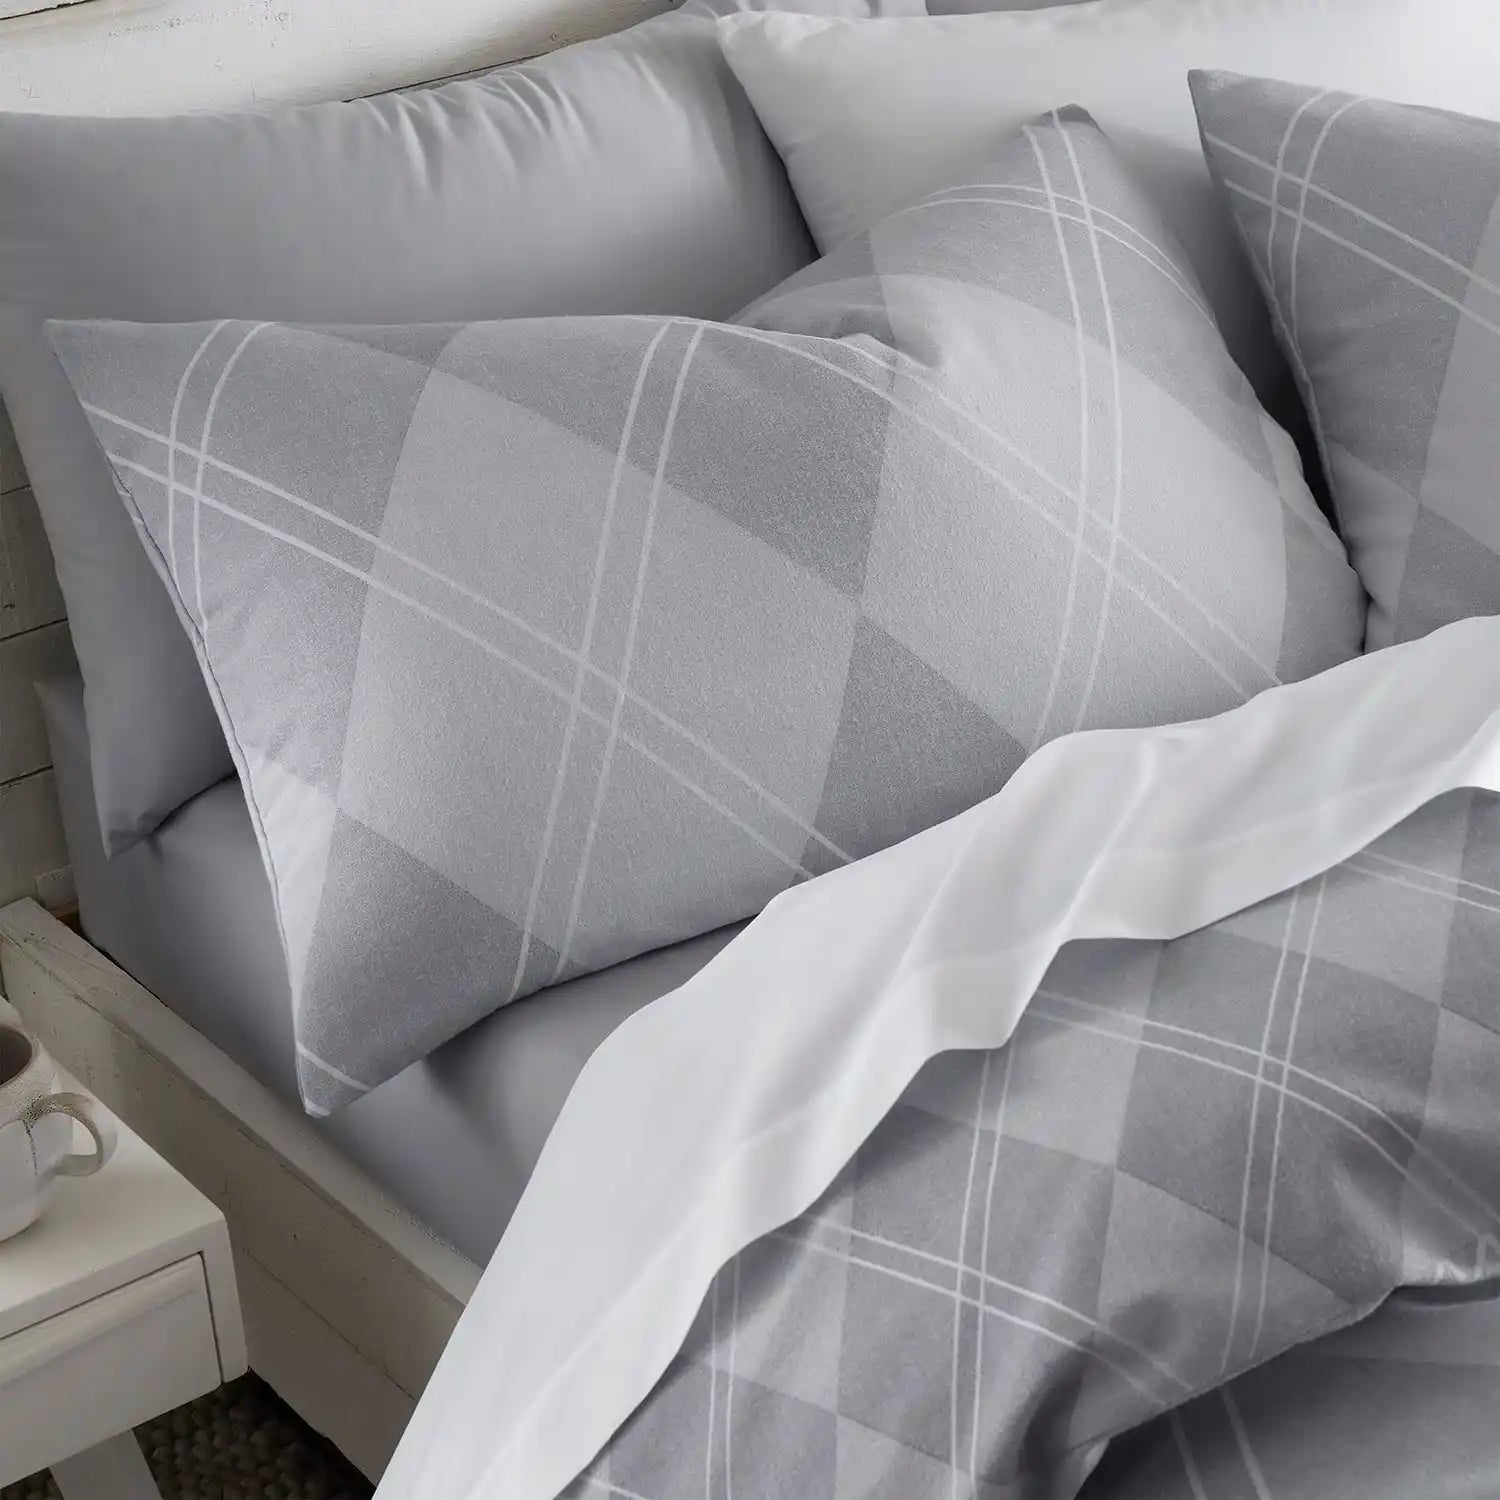  Catherine Lansfield Brushed Argyle Duvet Cover Set - Grey 3 Shaws Department Stores